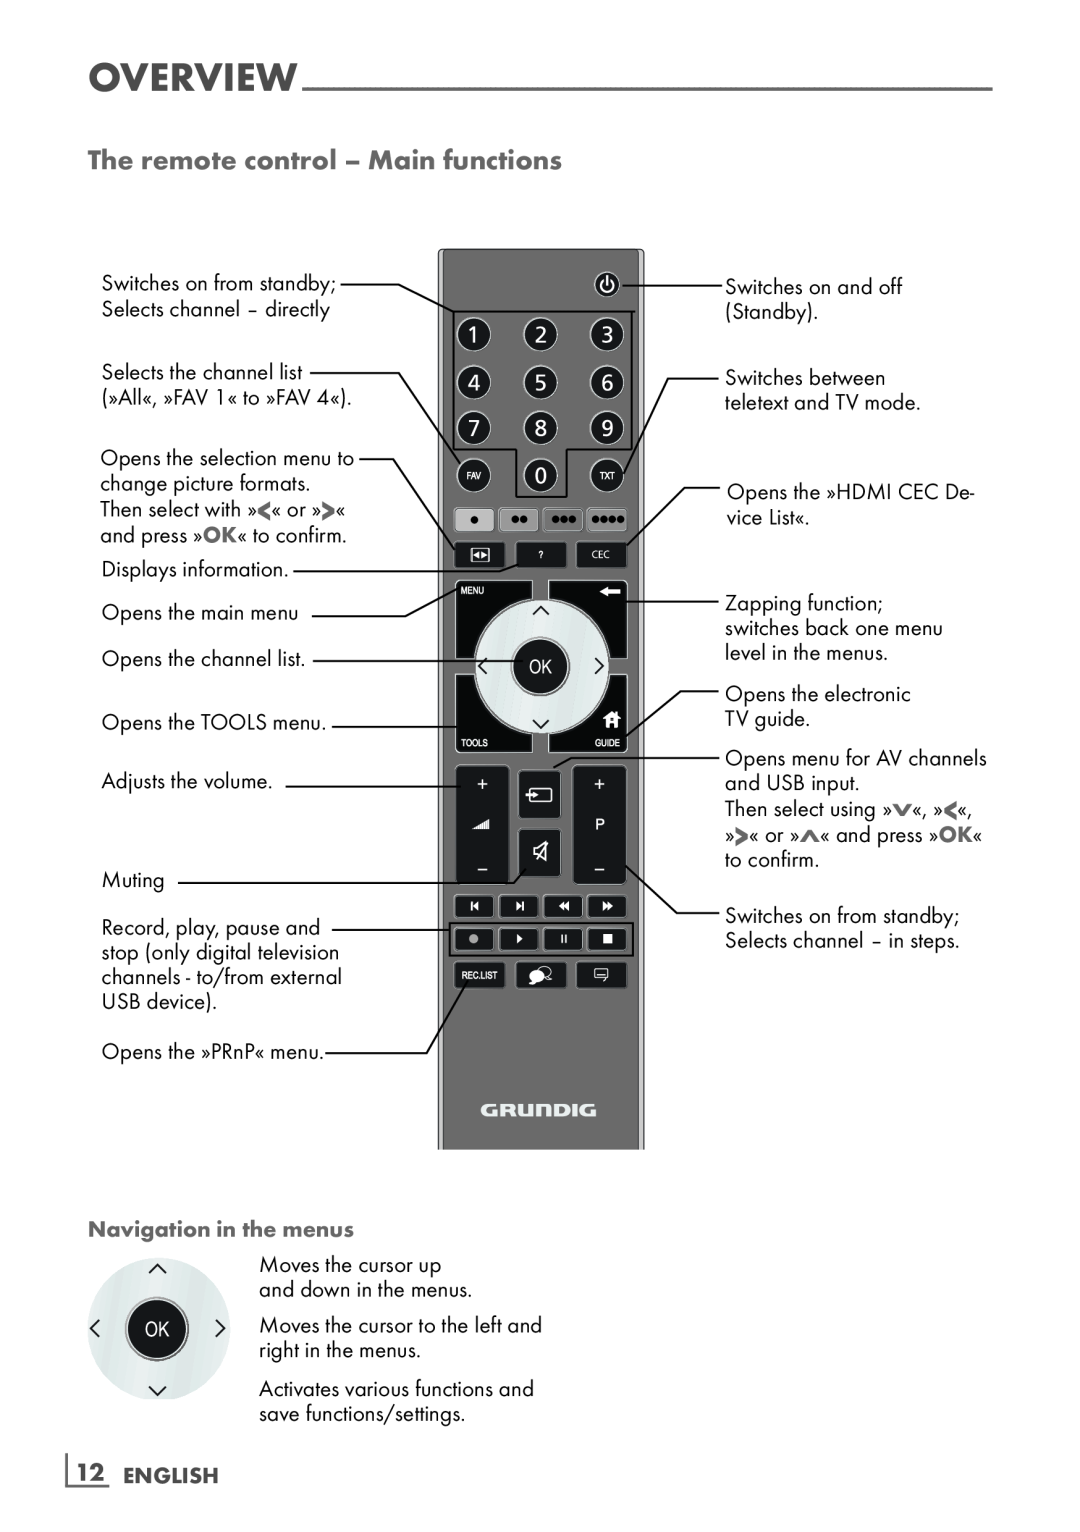 Grundig 42 VLS 9140 S, 37 VLC 9140 S manual The remote control - Main functions, ­12 ENGLISH, Navigation in the menus 